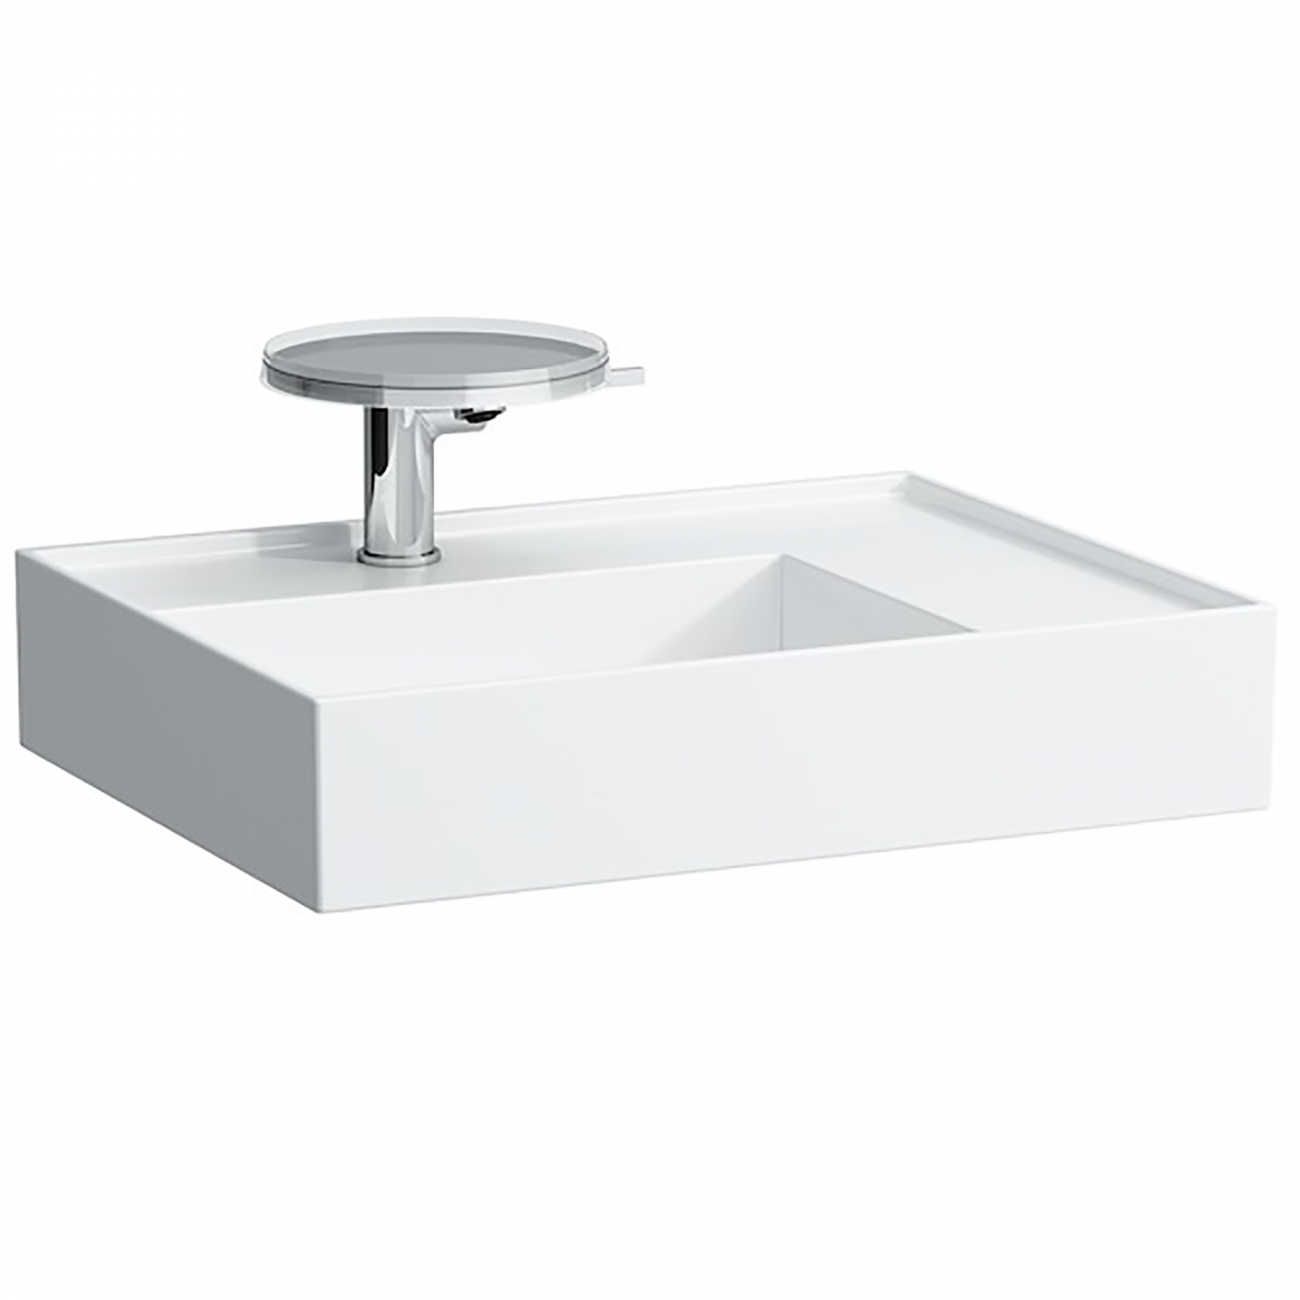 KARTELL BY LAUFEN WALL HUNG BASIN